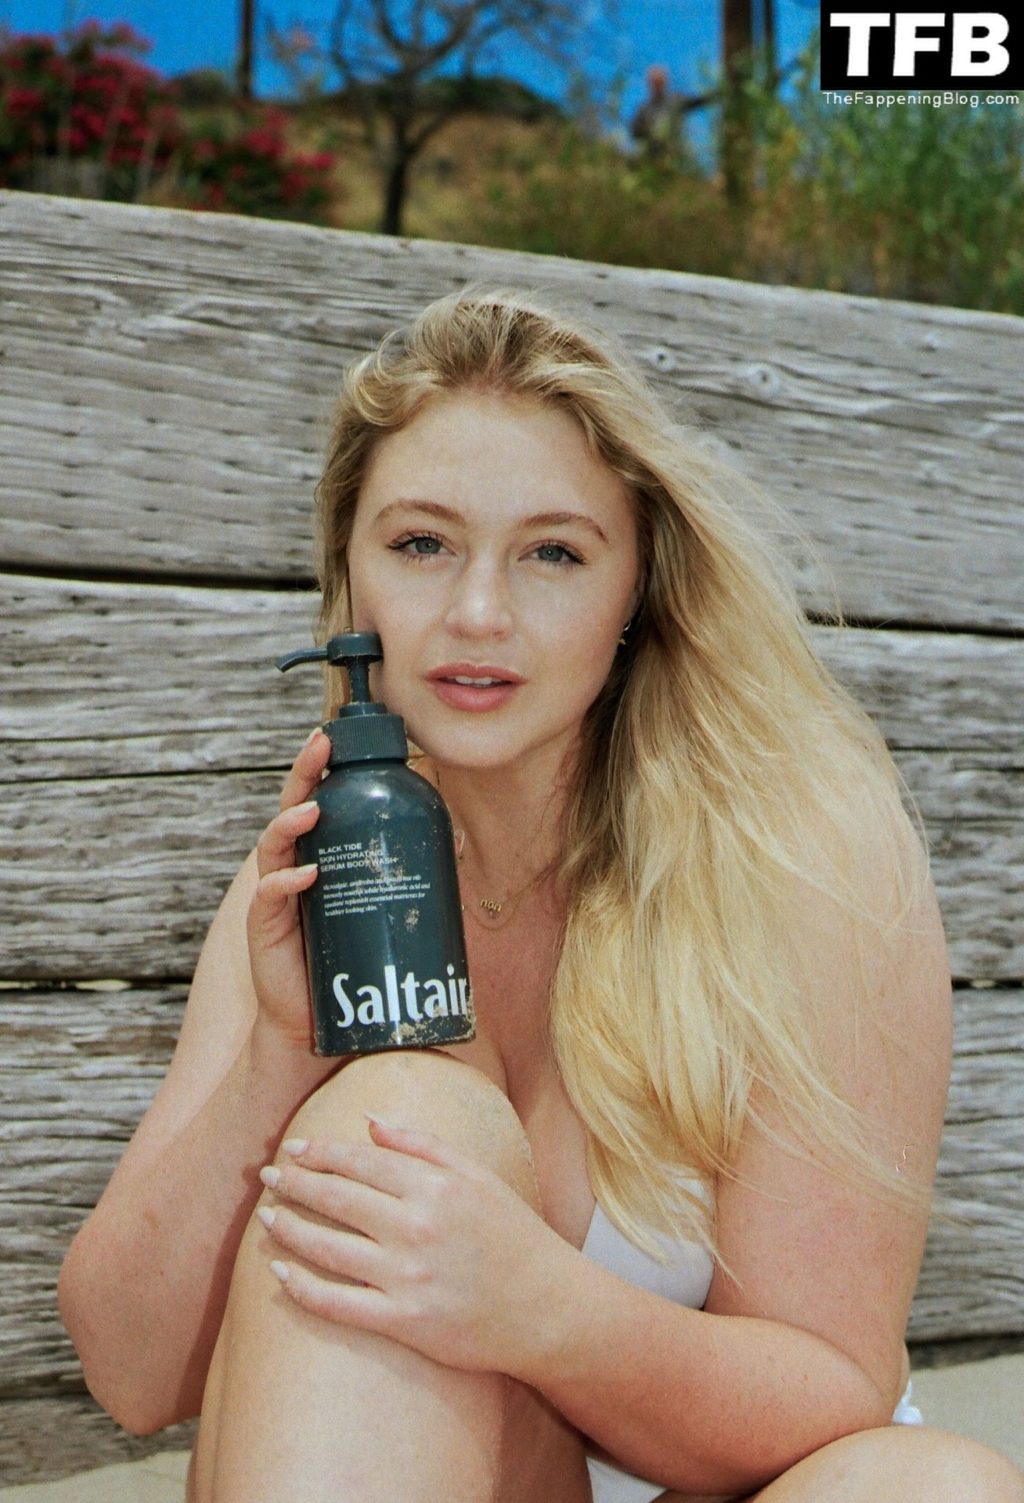 Iskra Lawrence Sexy The Fappening Blog 1 1024x1503 - Iskra Lawrence Poses for Her Saltair Skin Care Products in Los Angeles (11 Photos)